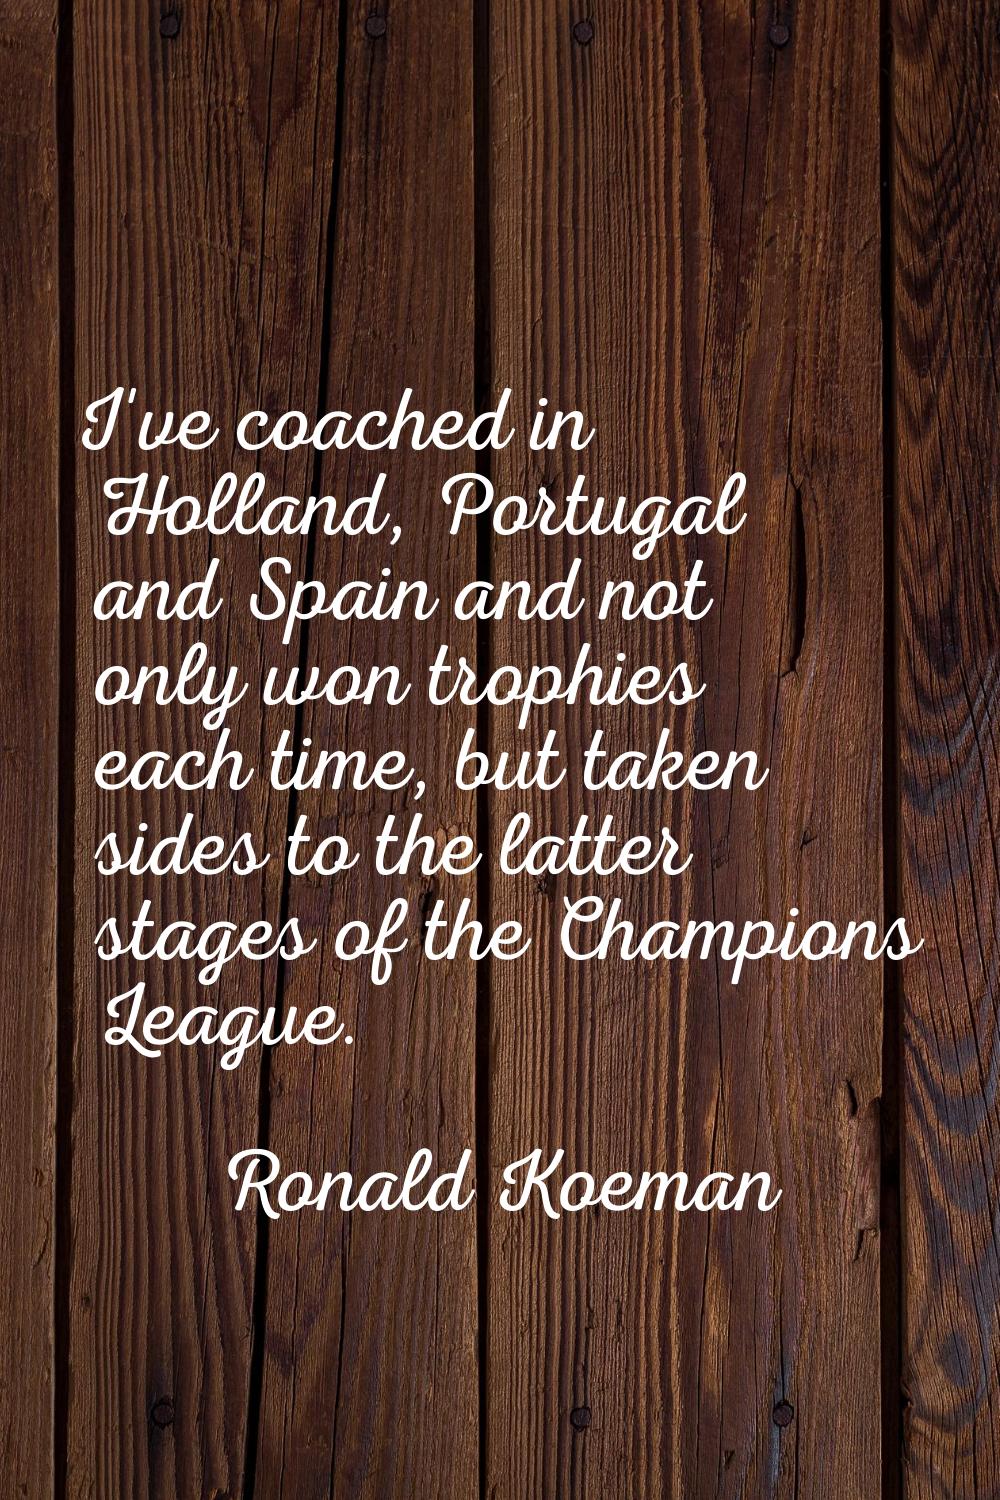 I've coached in Holland, Portugal and Spain and not only won trophies each time, but taken sides to